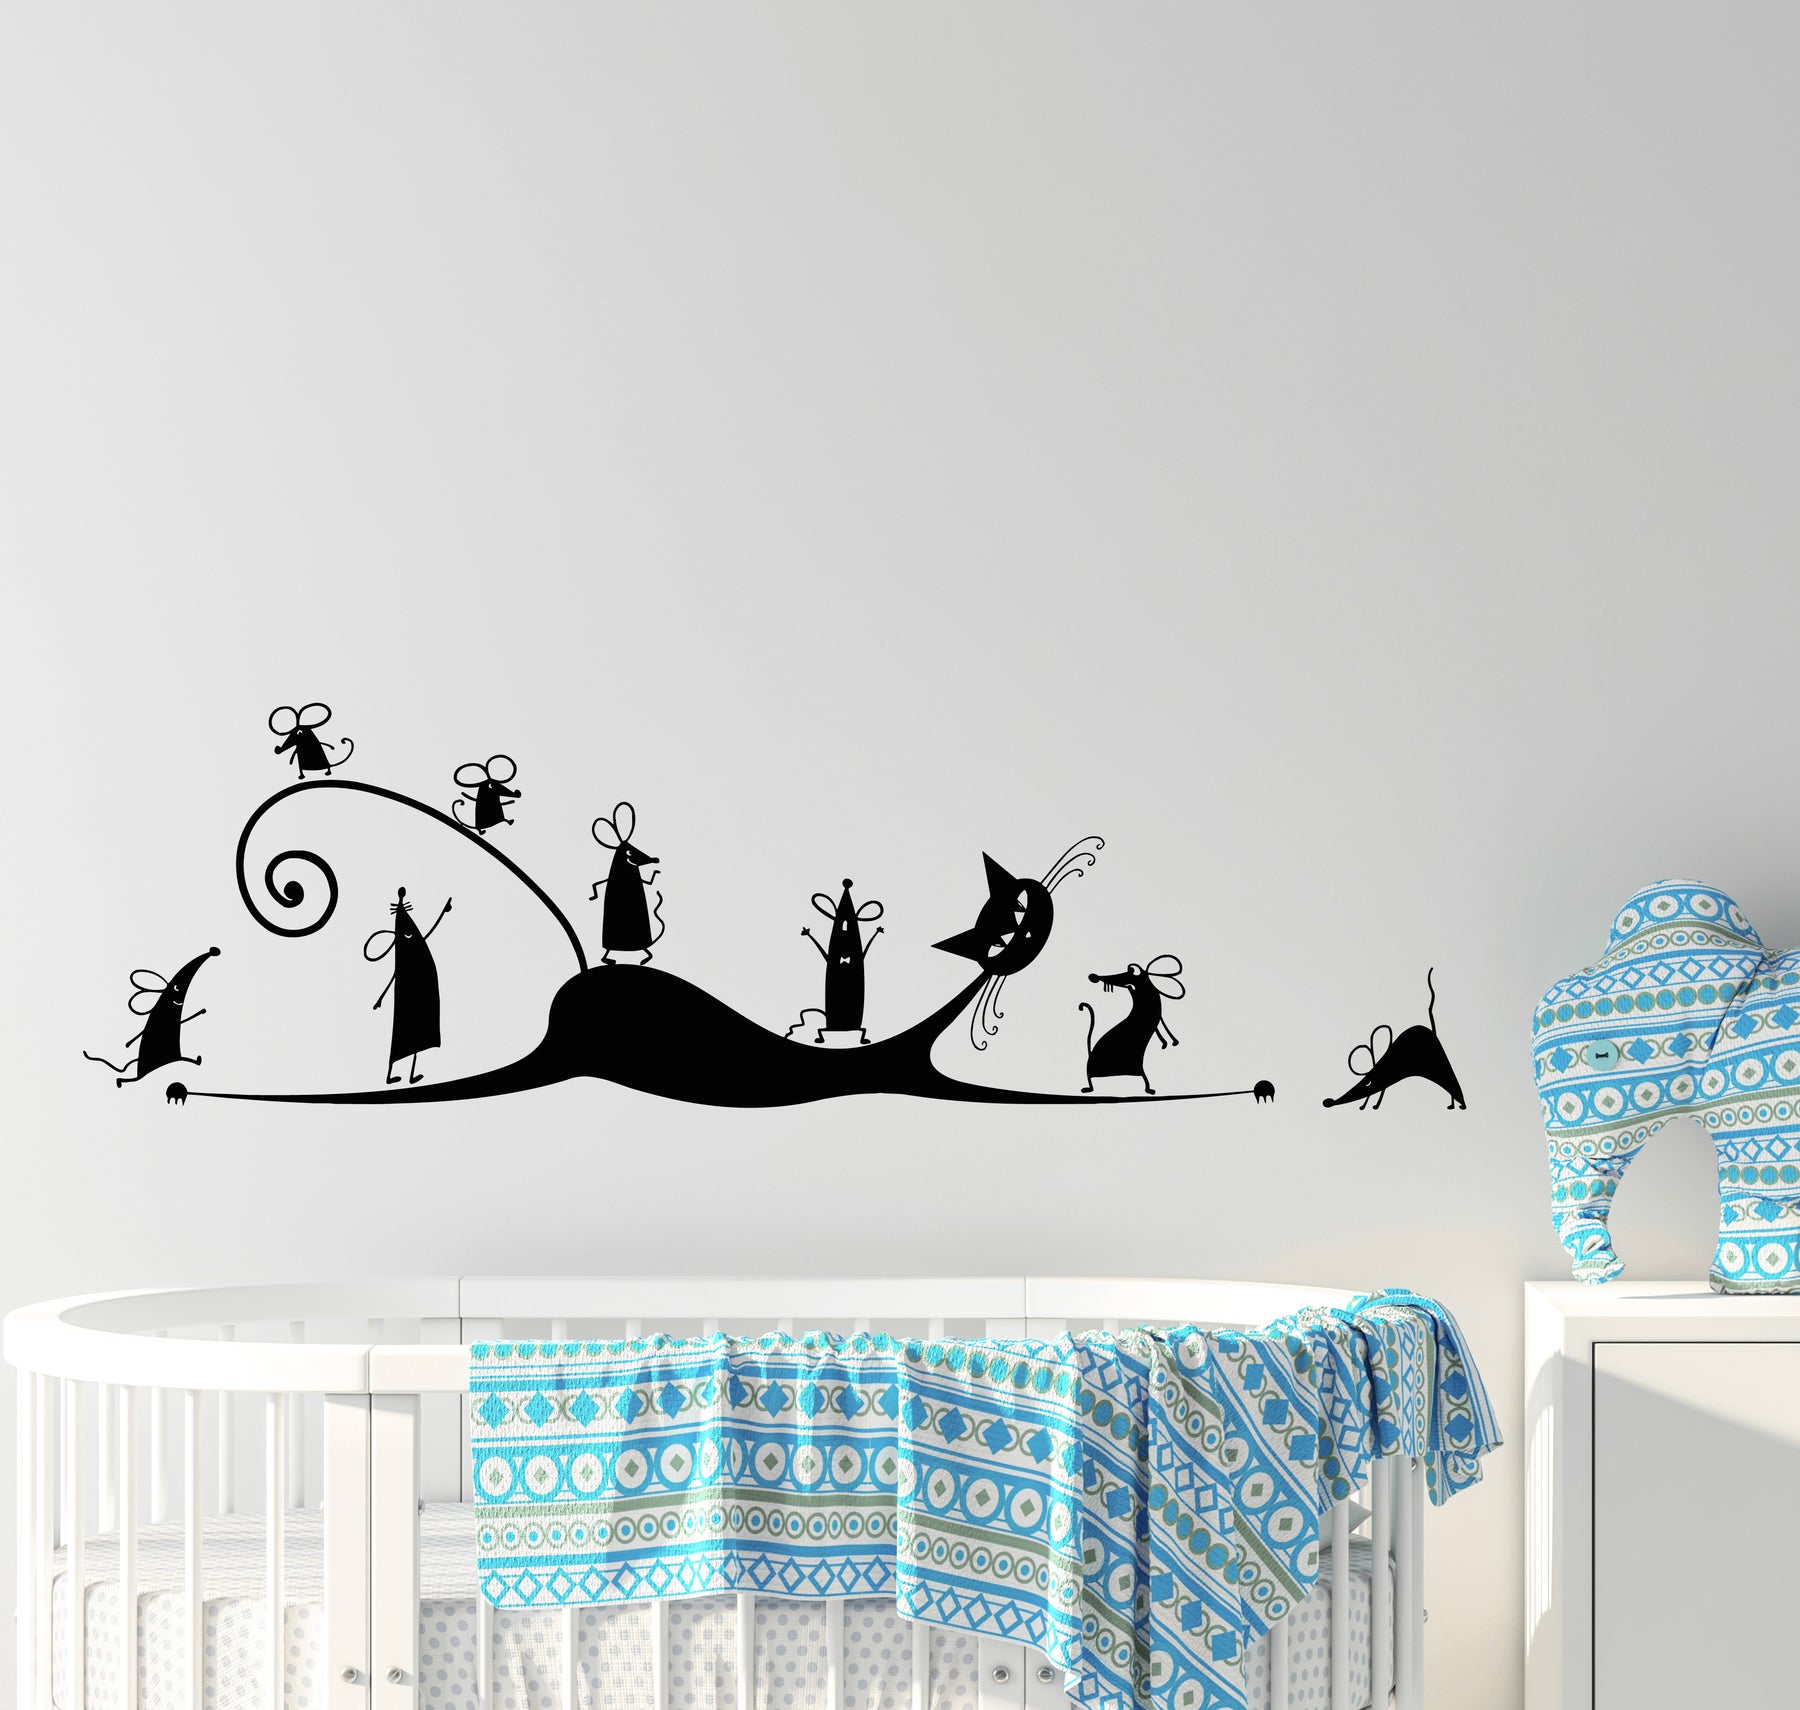 Funny and Cool Decorative Wall Decals for Kids Room